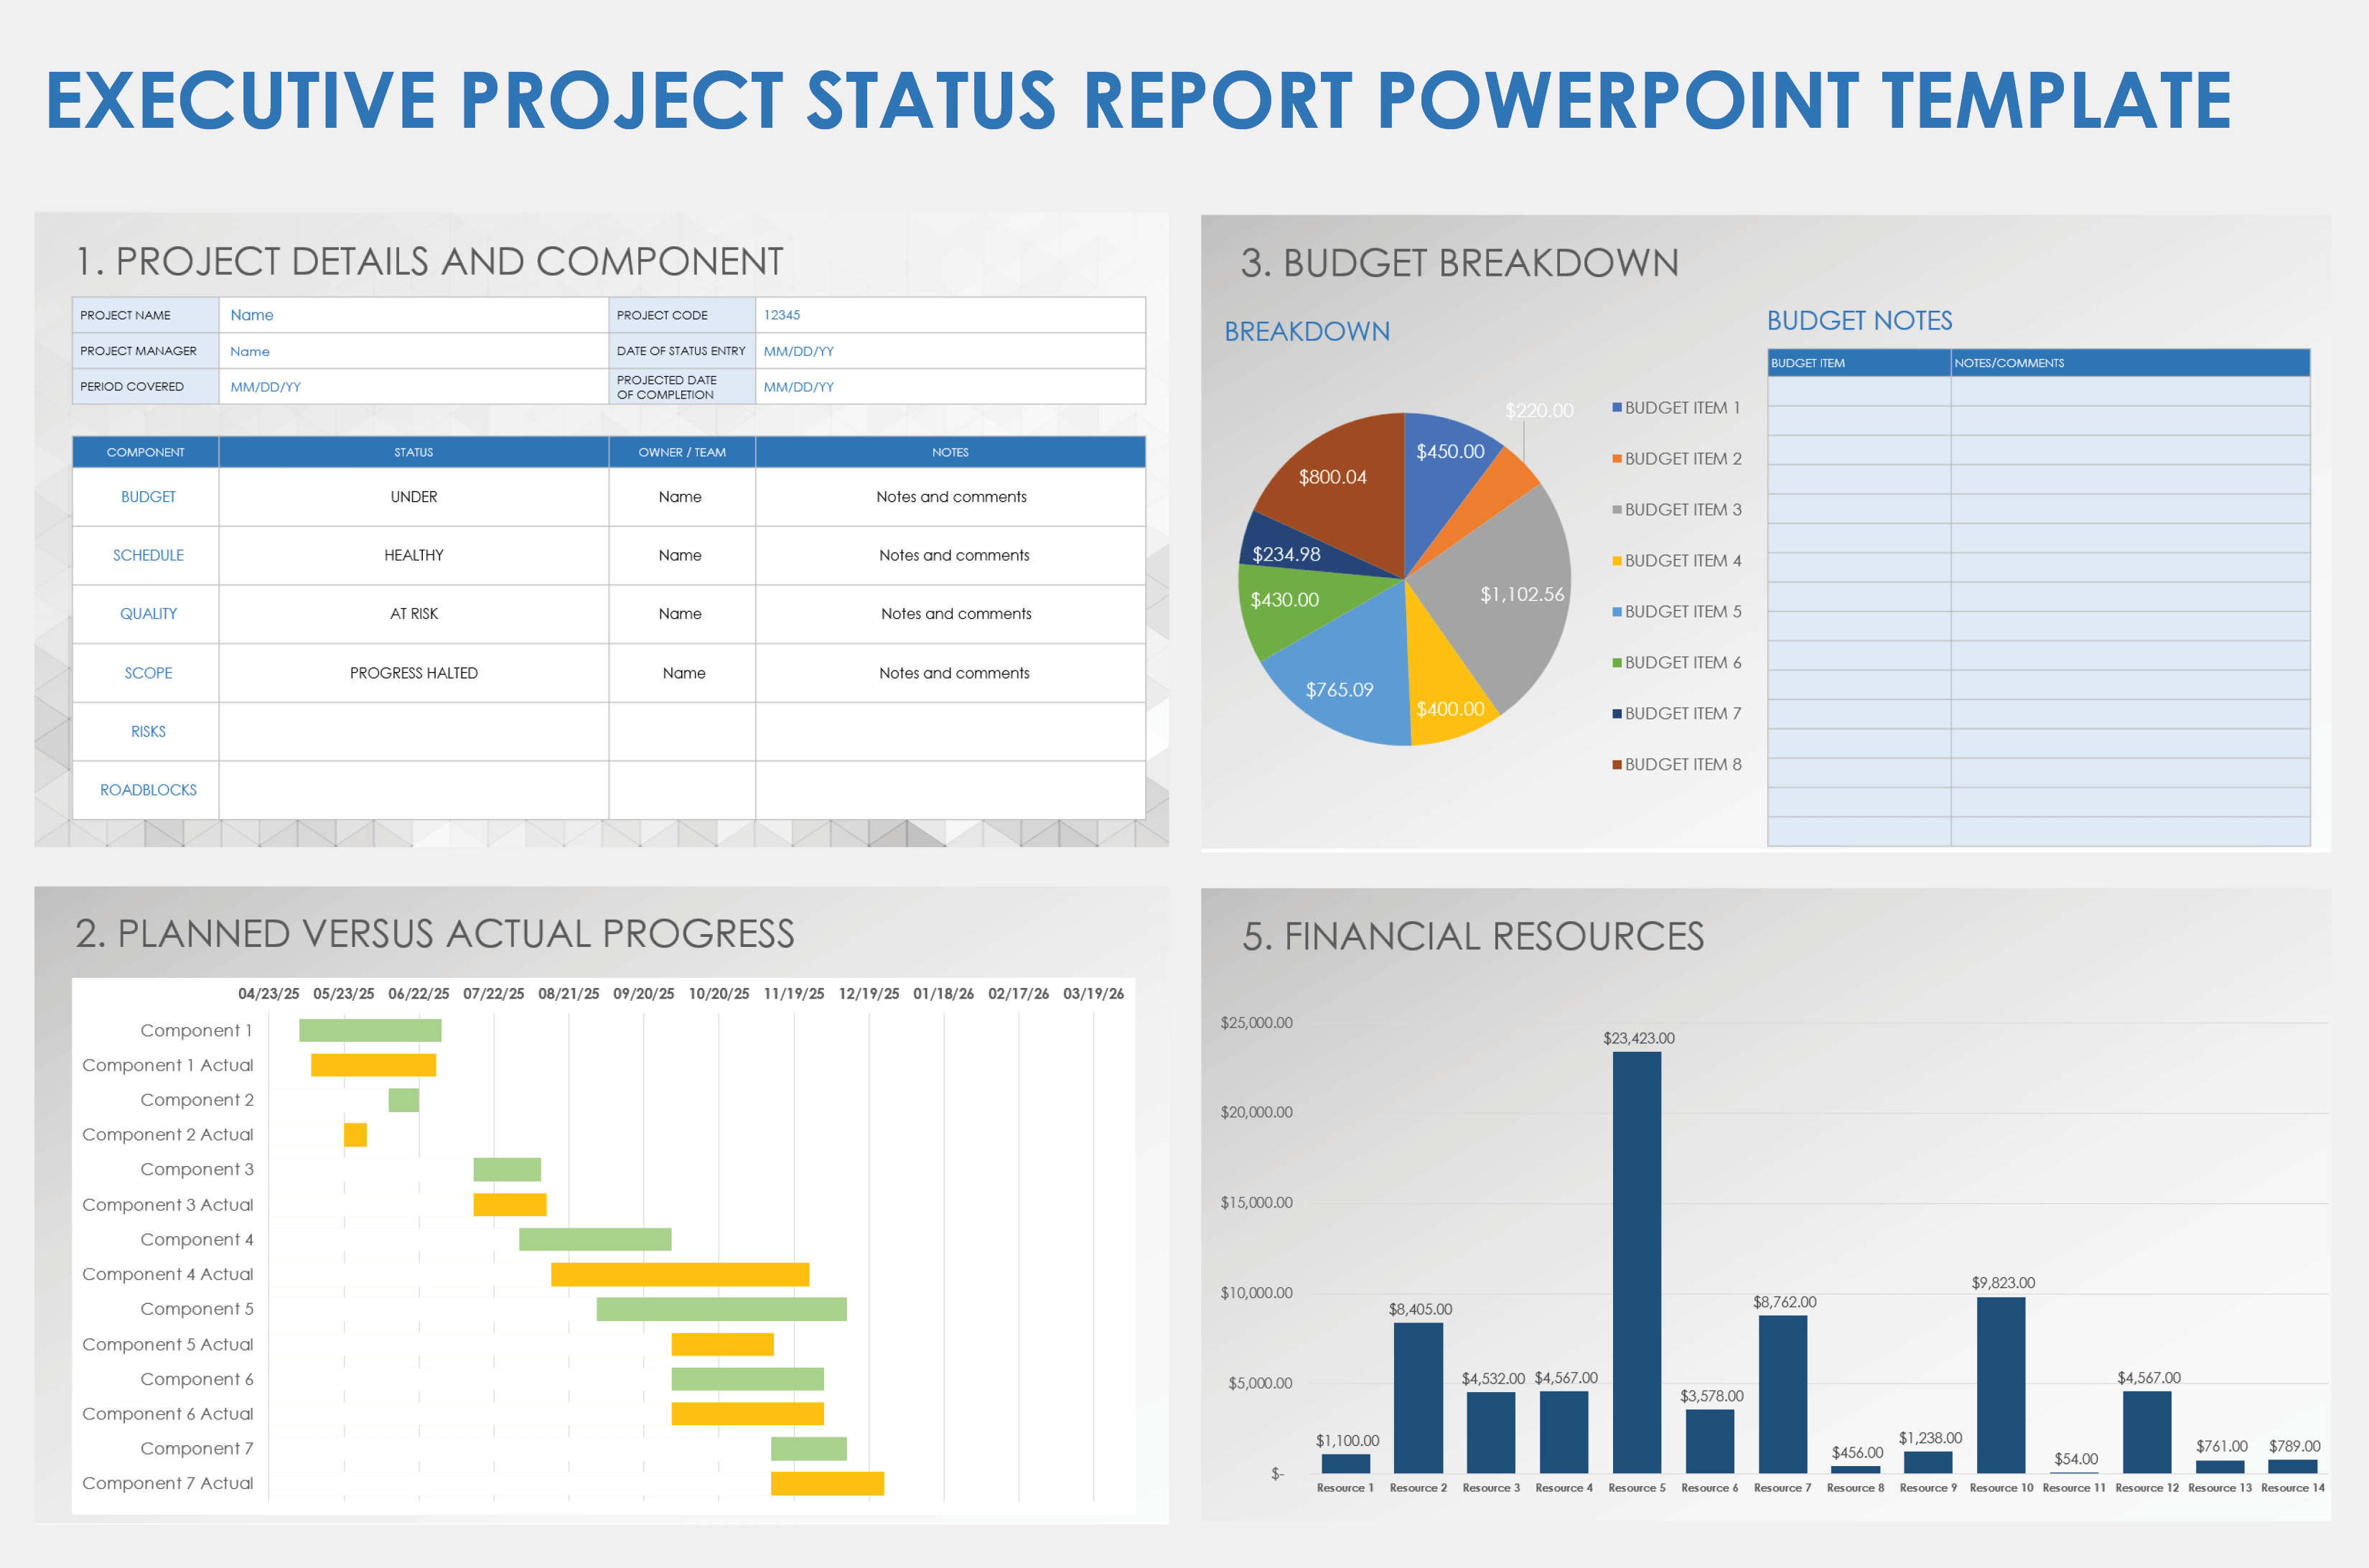 Executive Project Status Report PowerPoint Template